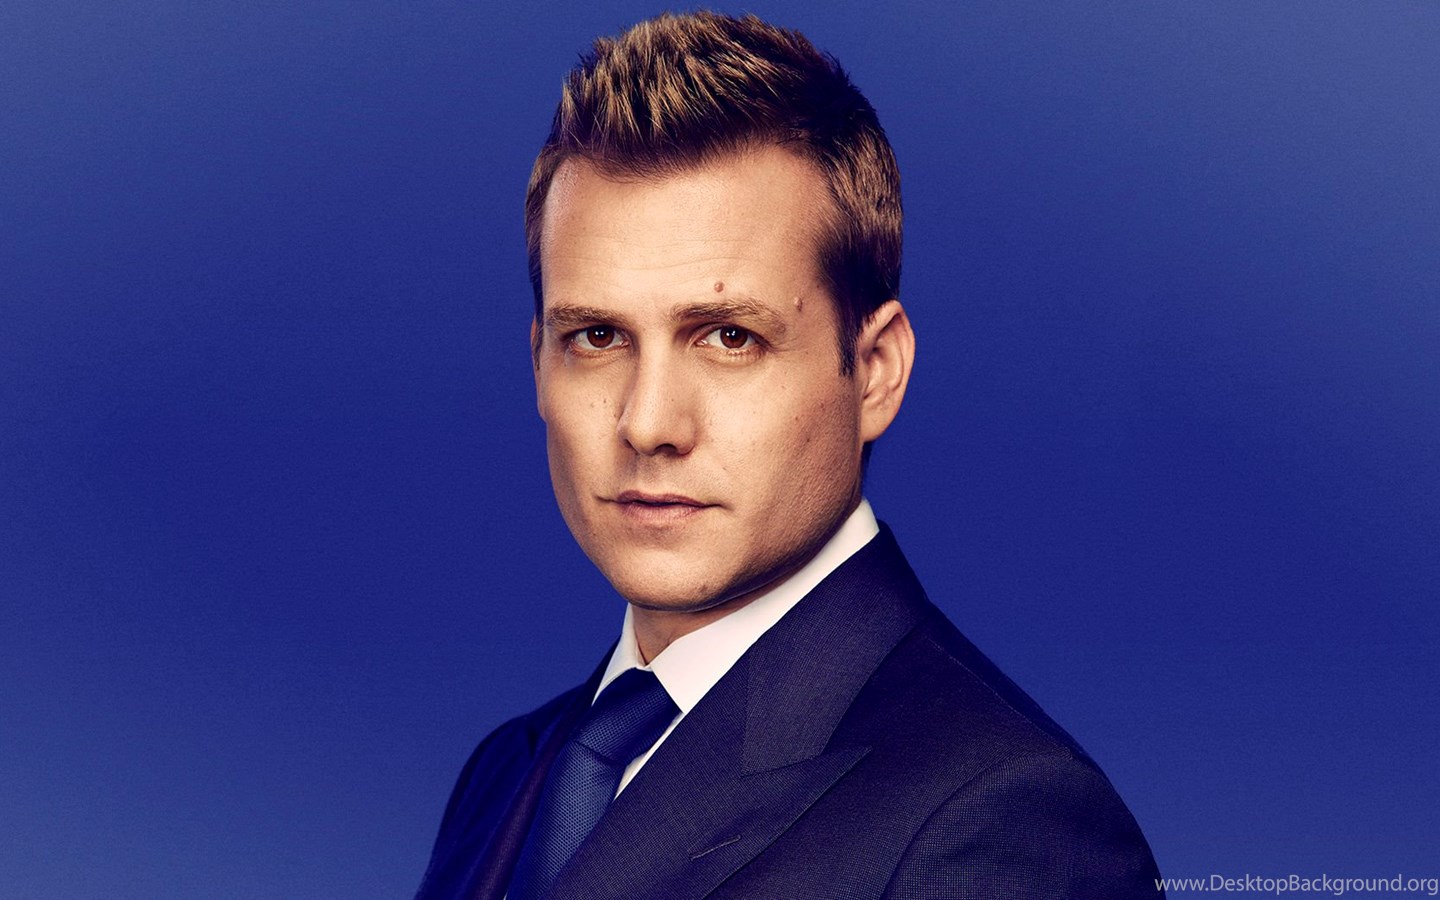 Harvey Specter's 11 rules of Success - YouTube